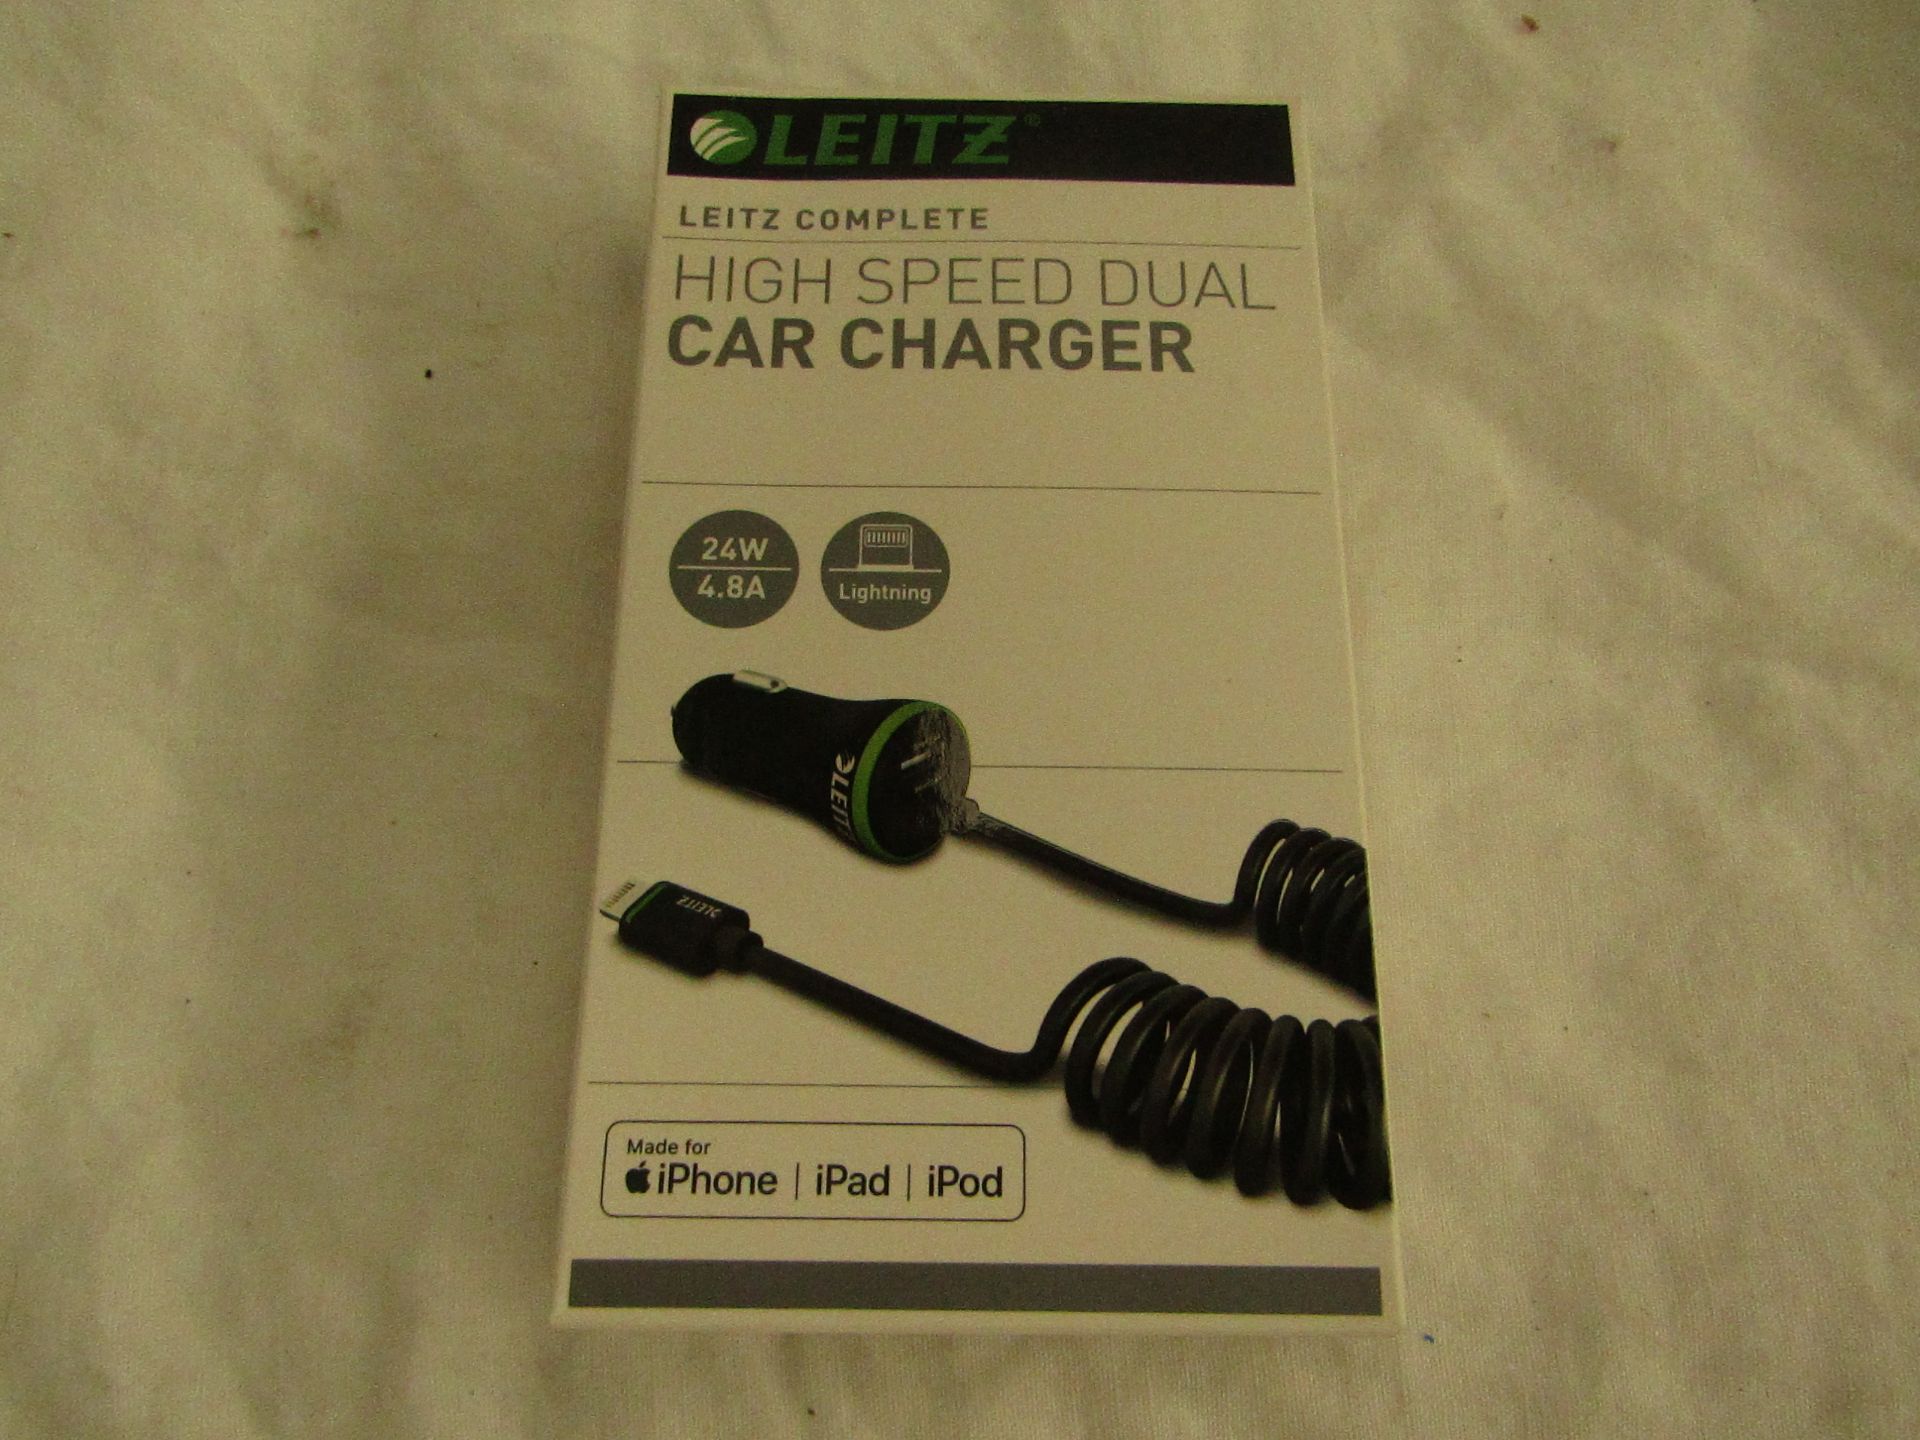 Leitz - High Speed Dual Lighening Car Charger - Suitable For Apple Products - New & Boxed.